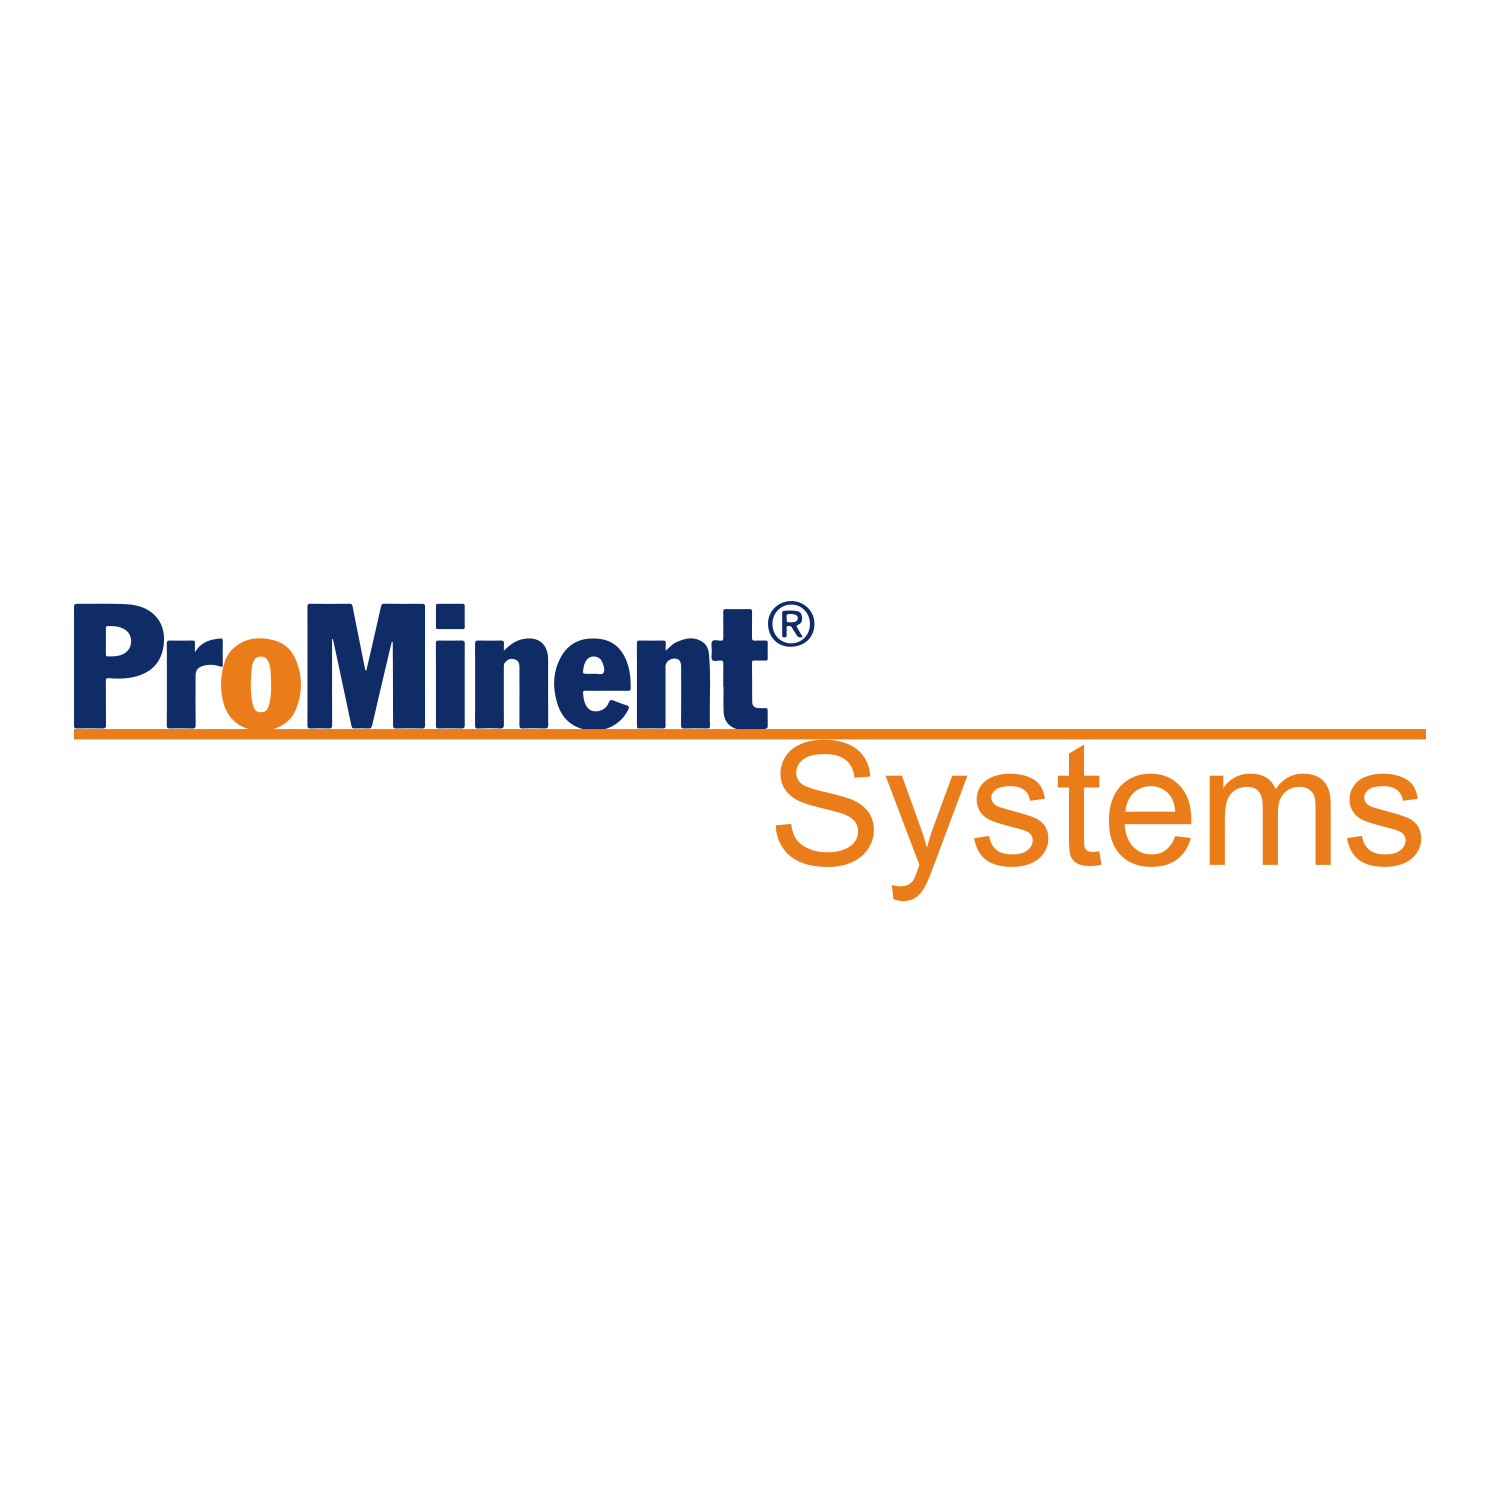 ProMinent Systems